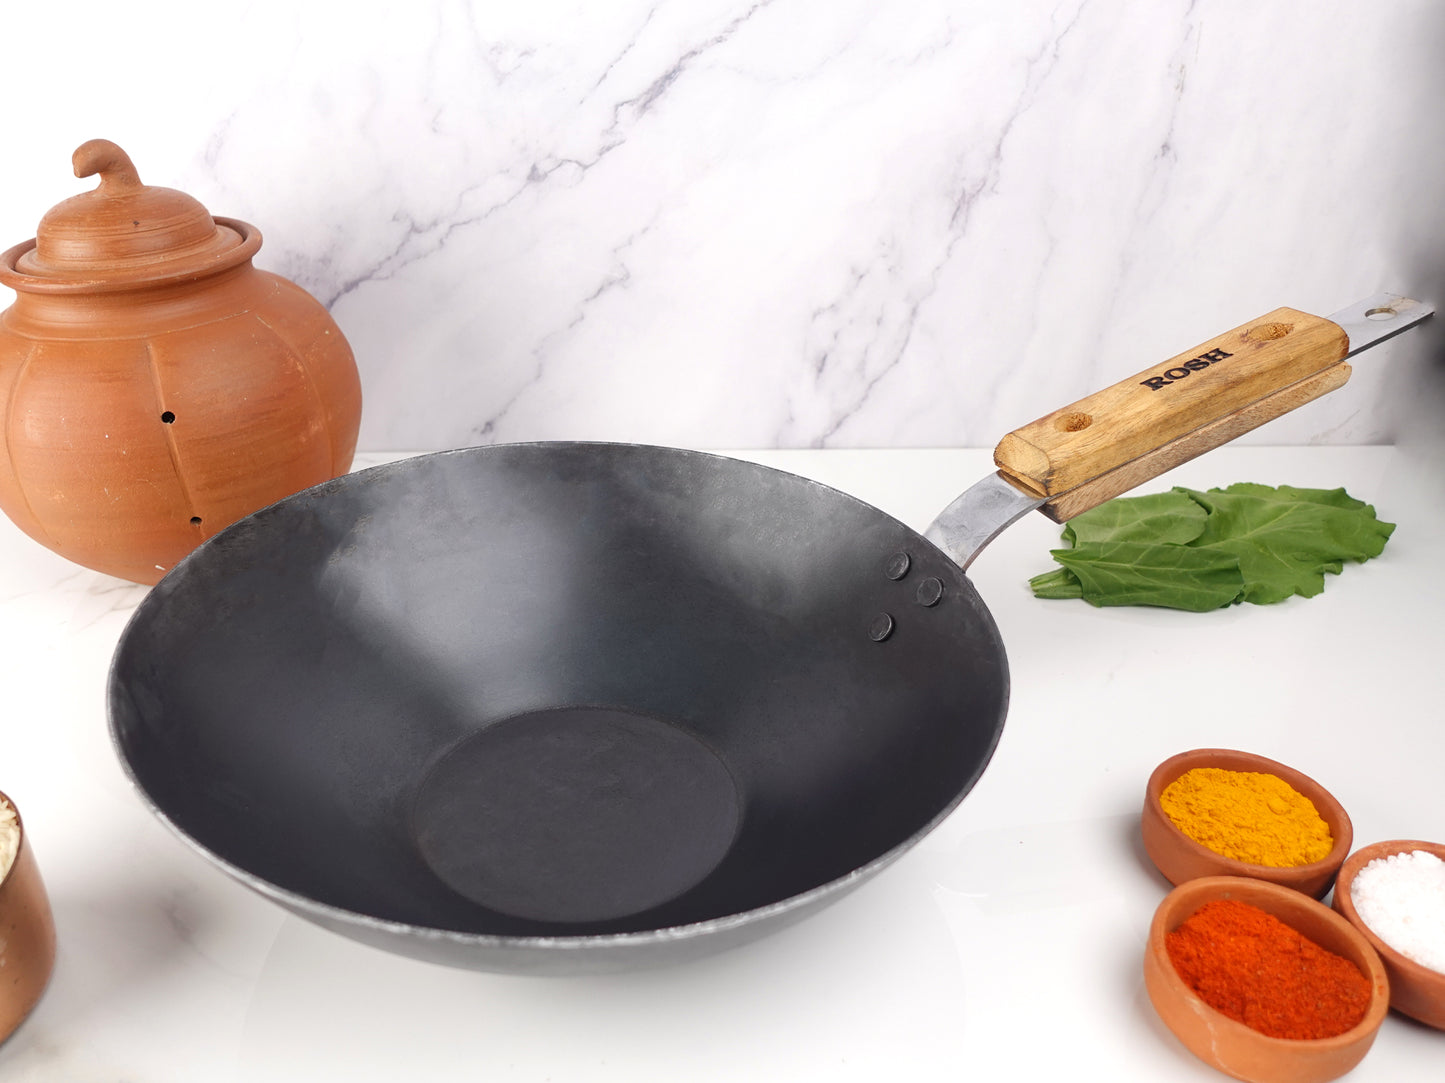 Combo  Offer - 19 - Dosa Tawa - Cast Iron - Single Handle - Non Grinded -Grill Pan - Reversable.  (2 In 1 ) -  Paniyaram Pan Cast Iron - 7 Pit Round Induction Base. Long Handle -  Chinese Wok -  Dutch Pot - Rosh - With Lid .